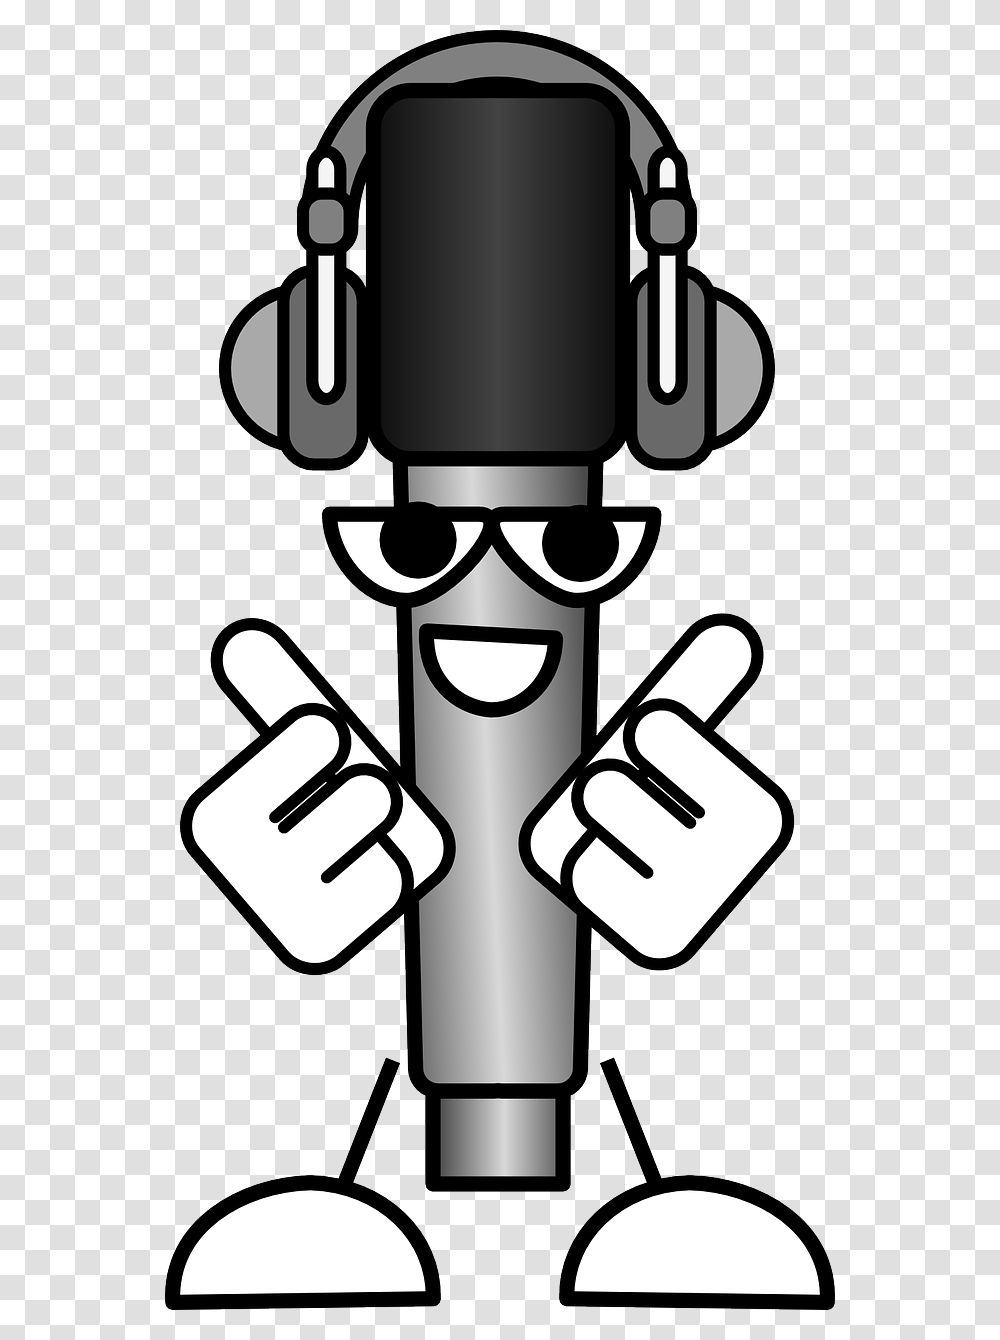 Mike The Mic With Headphones Clipart I2clipart Royalty Funny Cartoon Microphone, Hand, Stencil, Cutlery, Fork Transparent Png